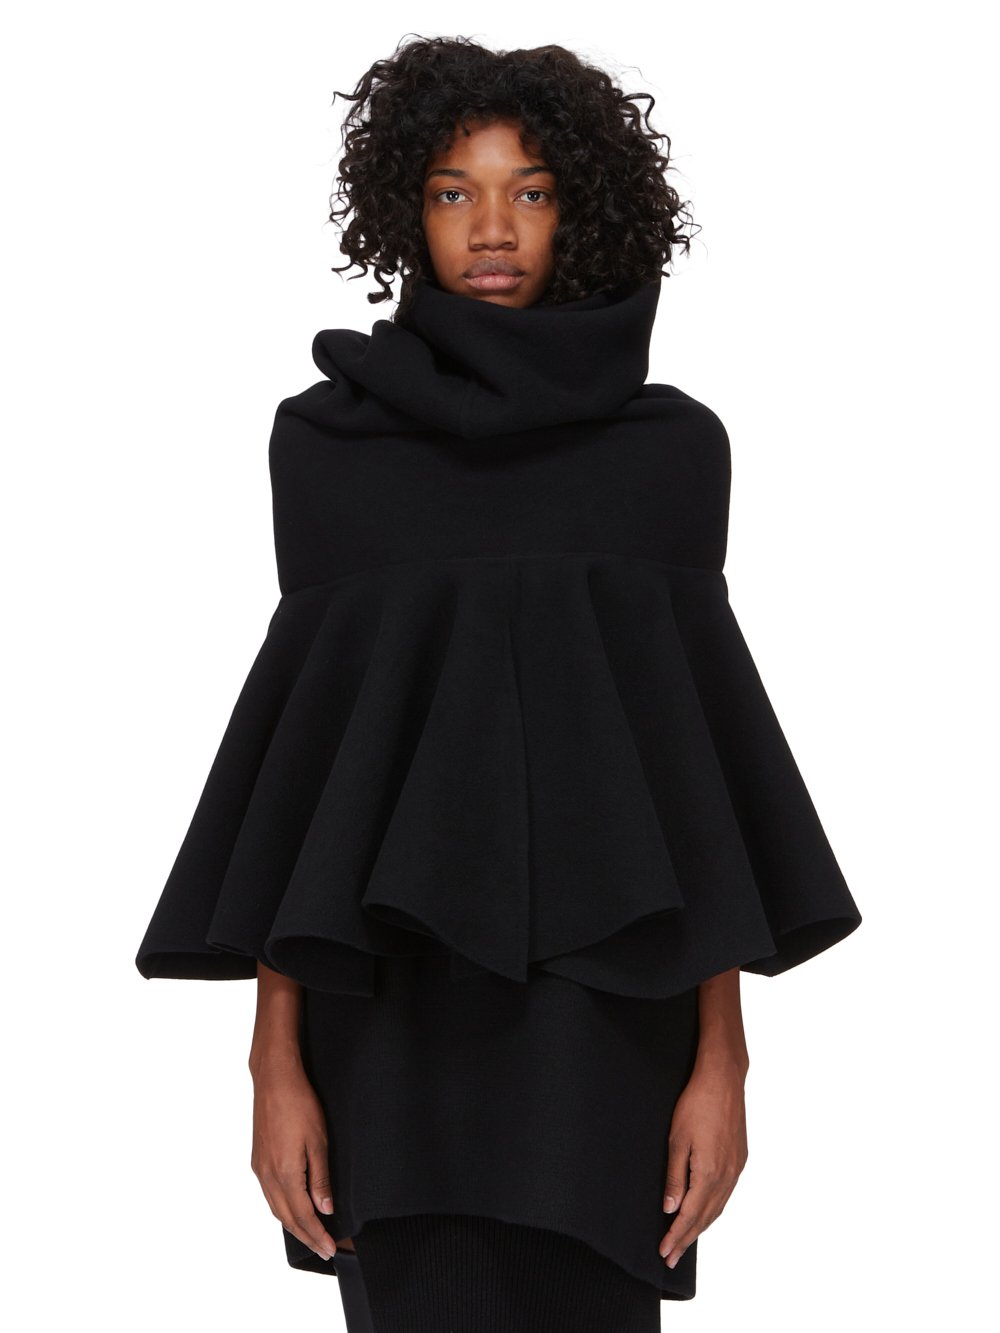 RICK OWENS FW23 LUXOR RUNWAY COWL FULL CAPE CROPPED IN BLACK DOUBLE CASHMERE